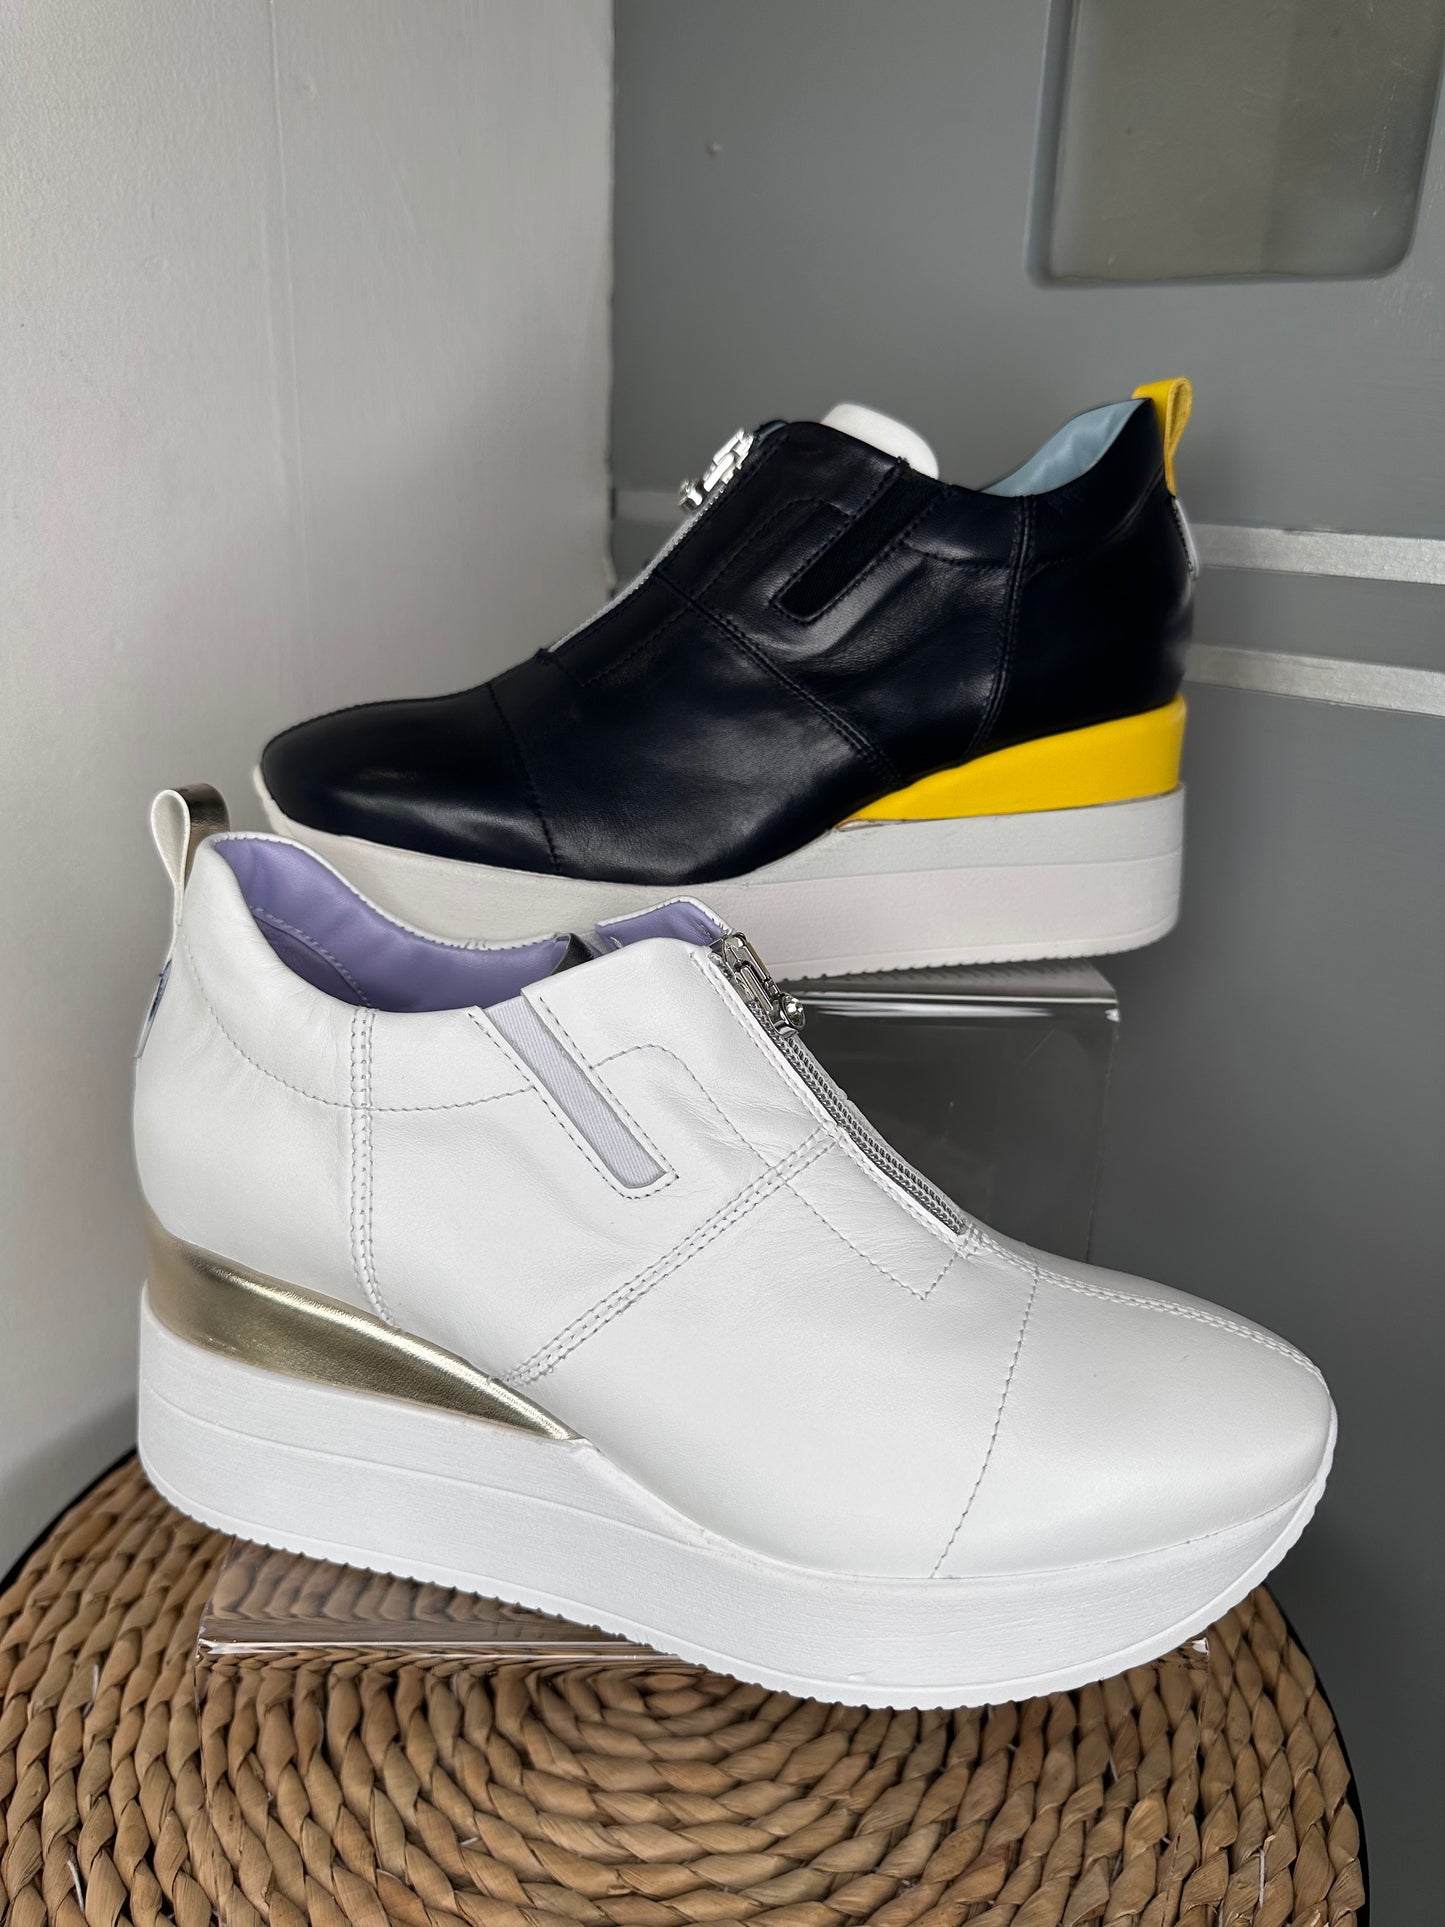 Marco Moreo - Marlies Dark Navy Zip Up Shoe With A Wedge Sole & A White/Yellow Trim